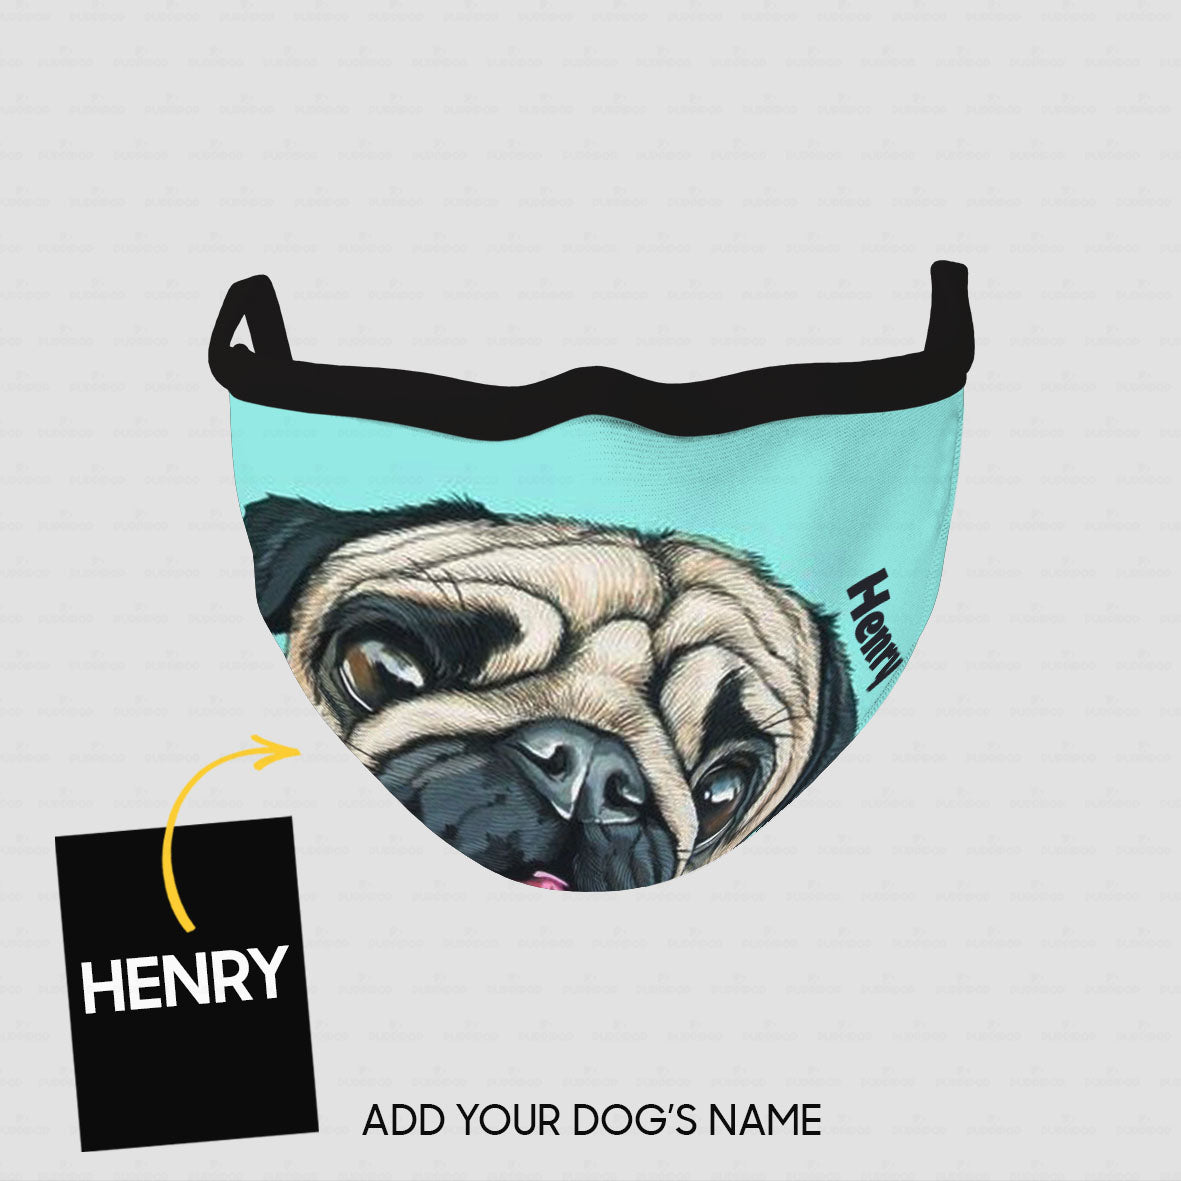 Personalized Dog Gift Idea - Half Of Pug's Face For Dog Lovers - Cloth Mask